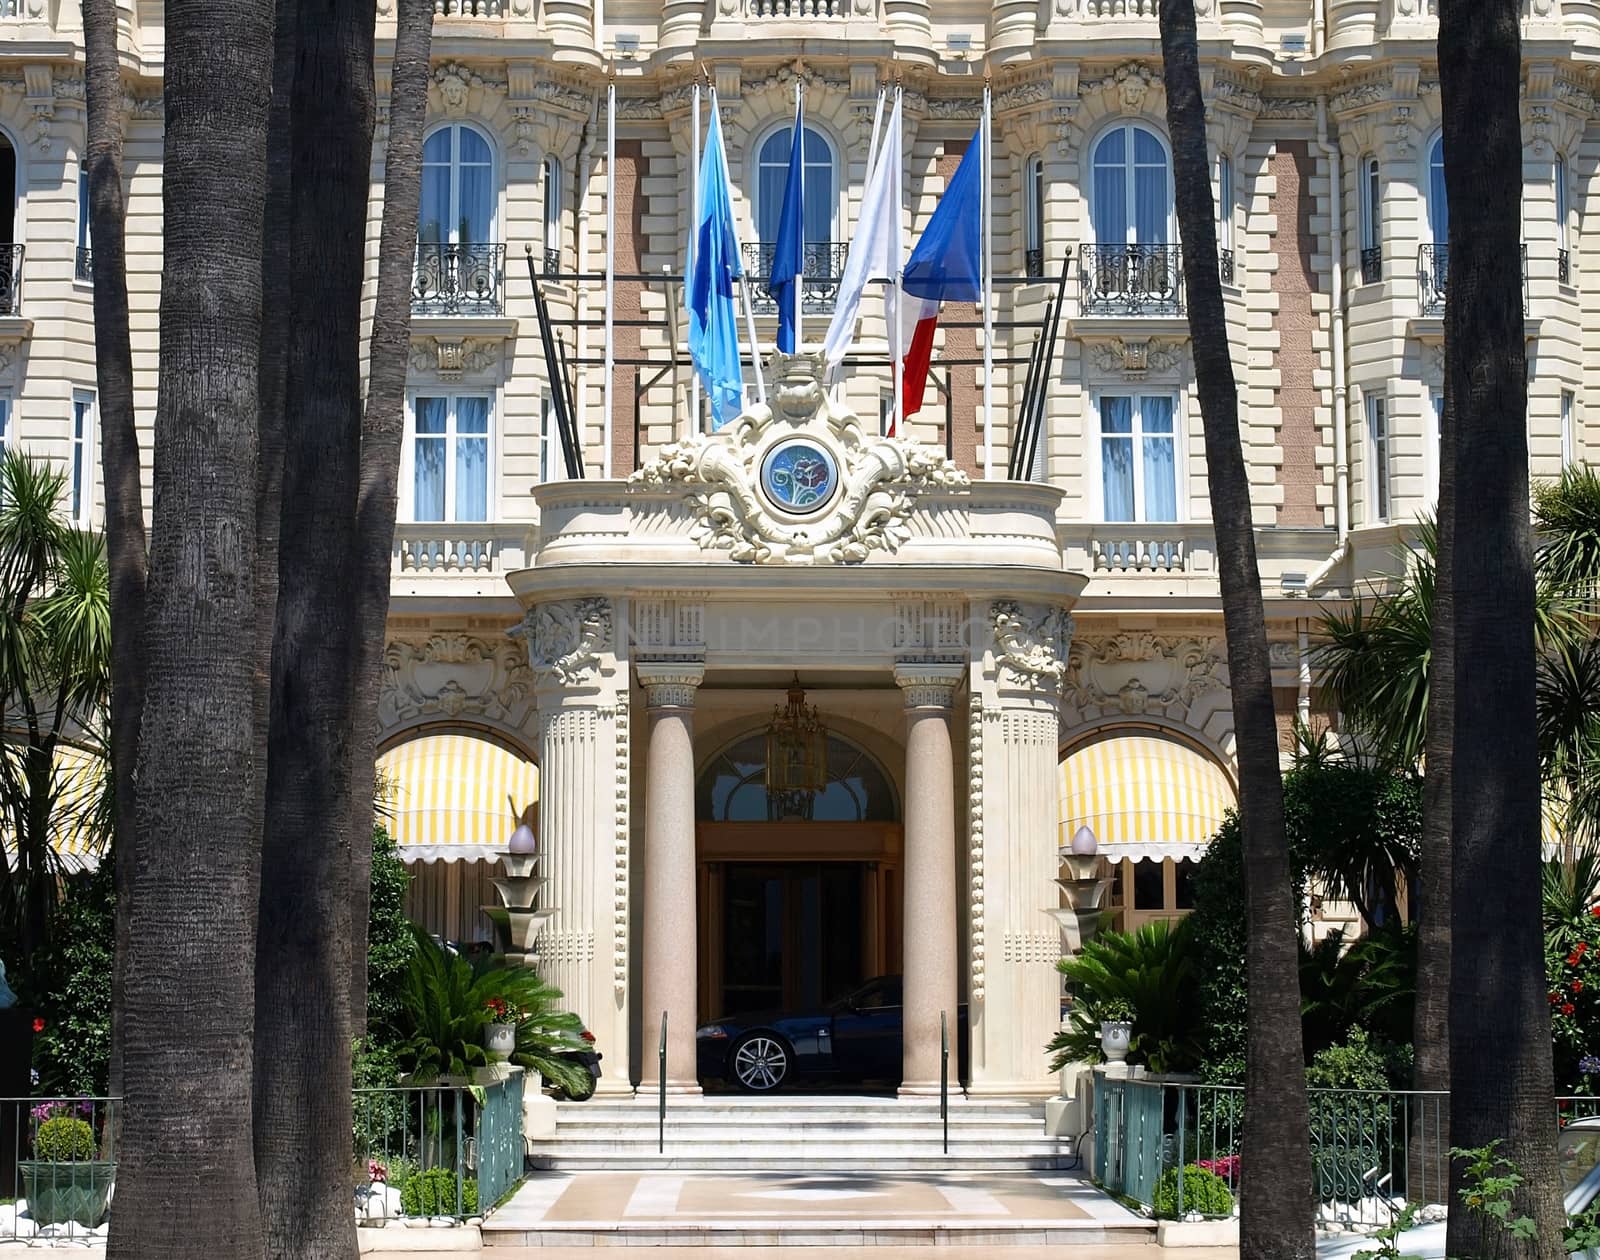 Main Entrance of Hotel on Croisette promenade in Cannes France.